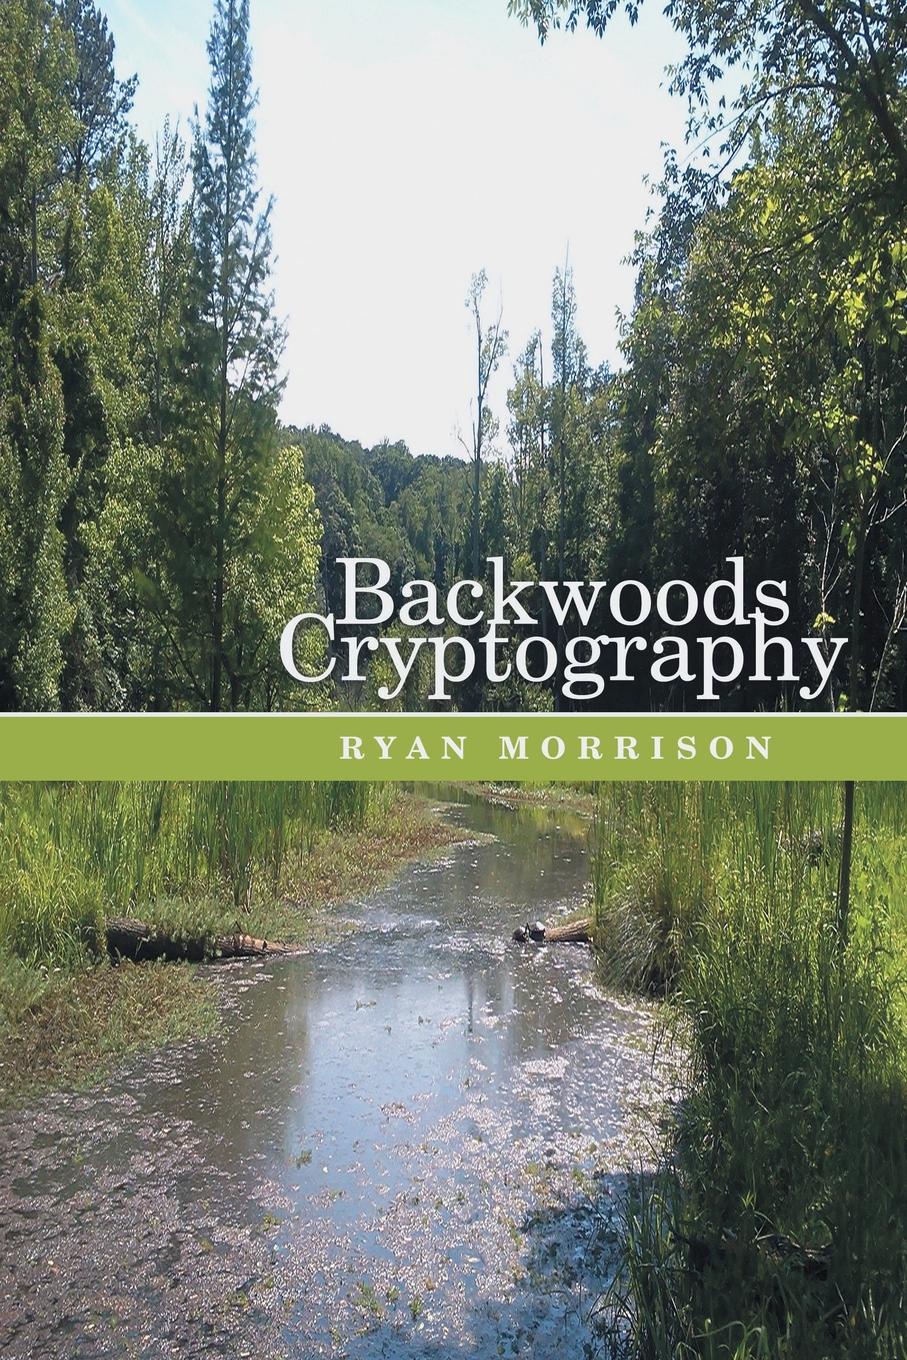 Backwoods Cryptography